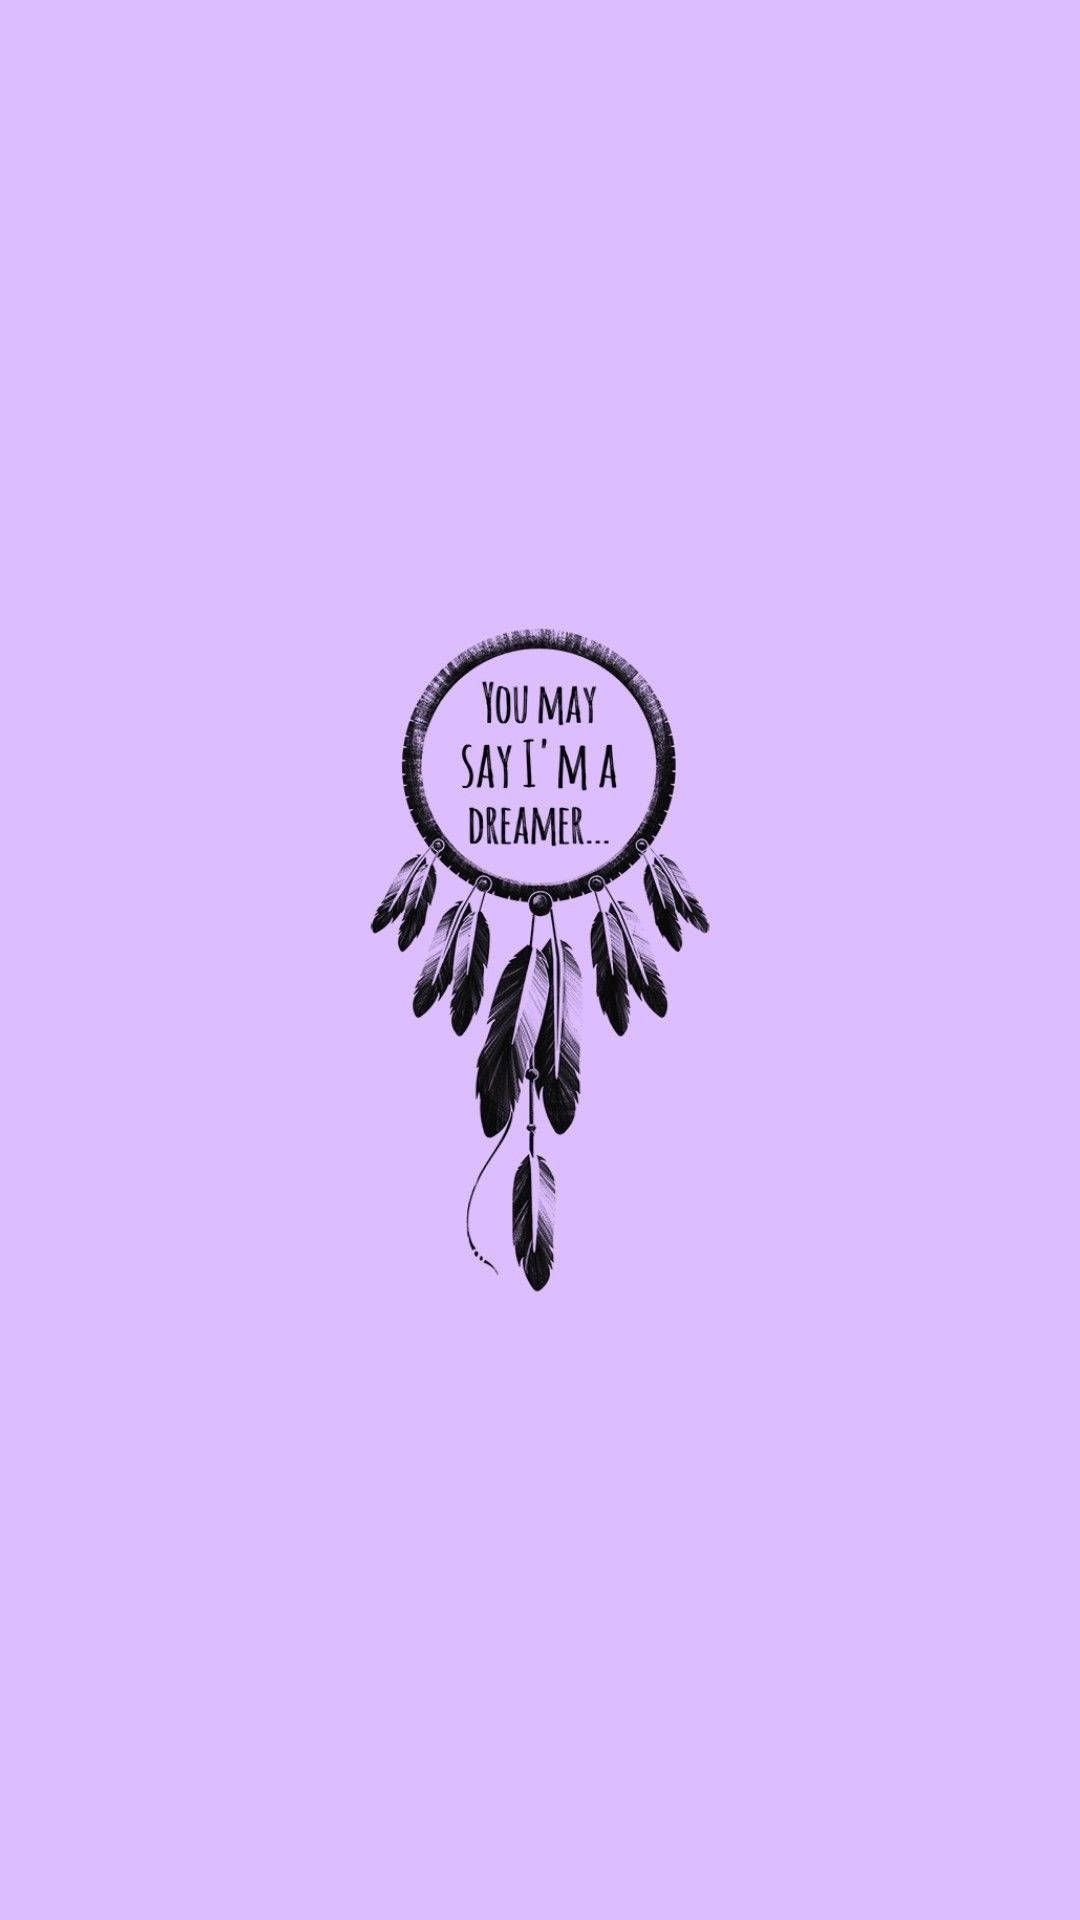 A purple background with a black dream catcher in the middle. The words 